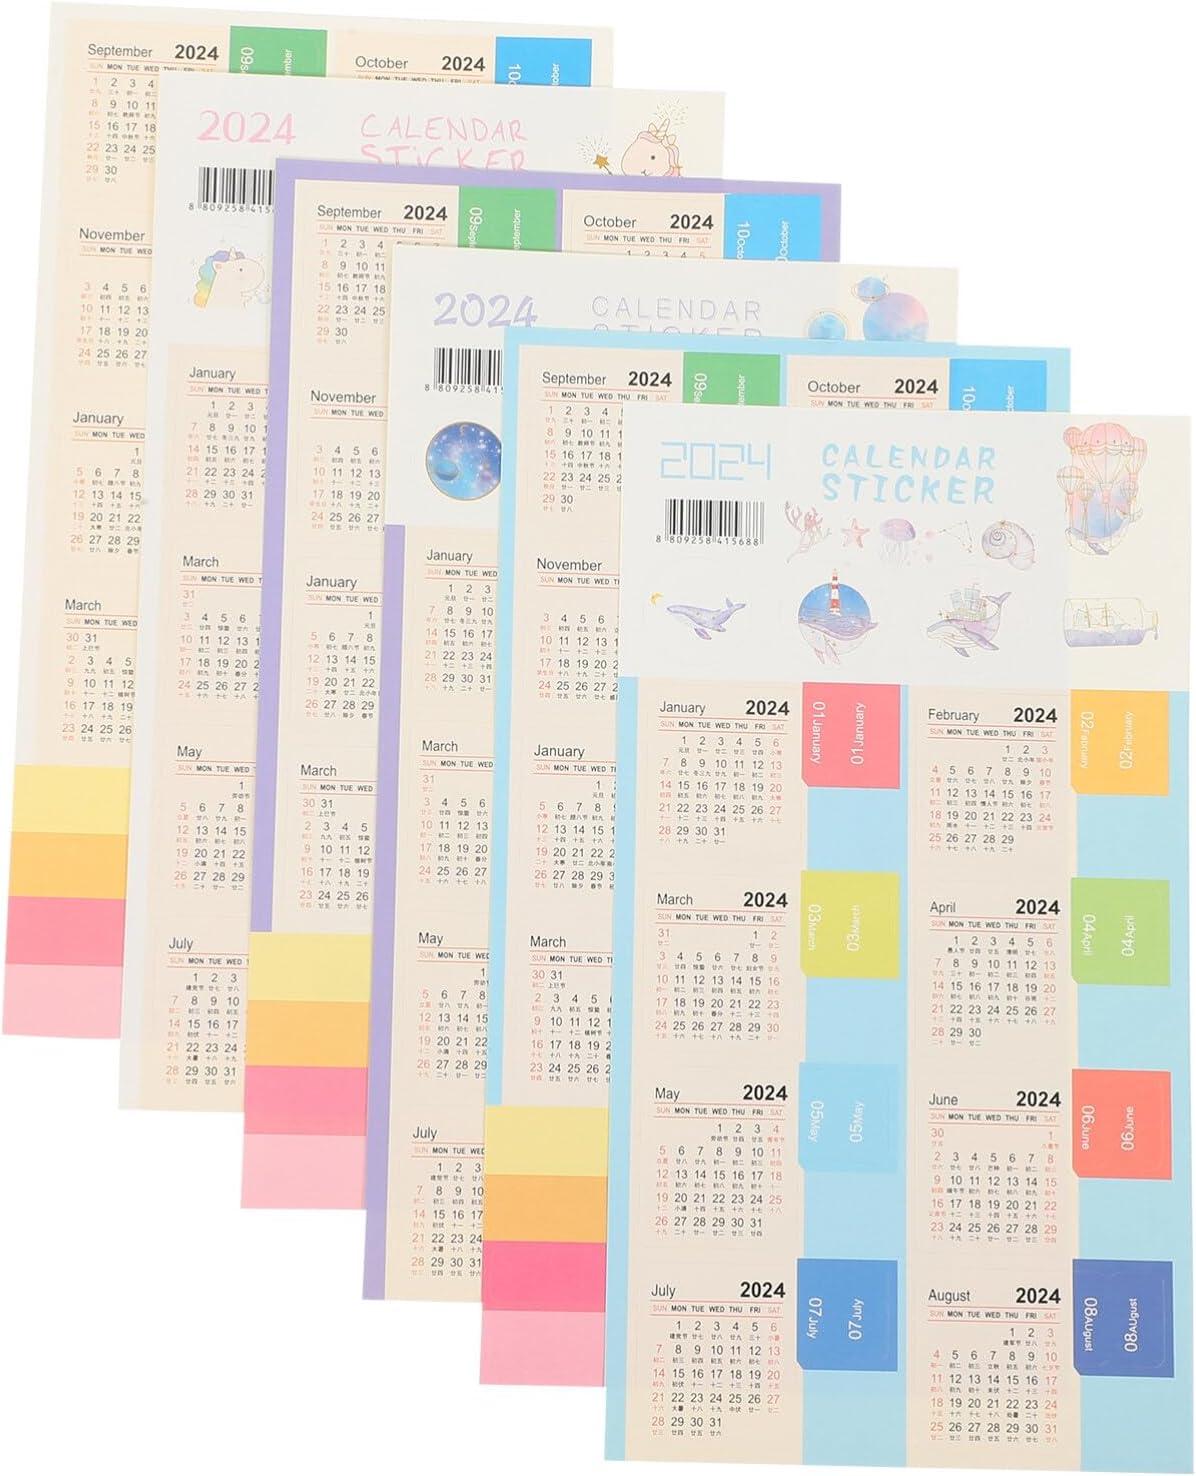 villcase 2024 calendar stickers 24 sheets monthly calendar sticker adhesive monthly  villcase b0cn9hps4z